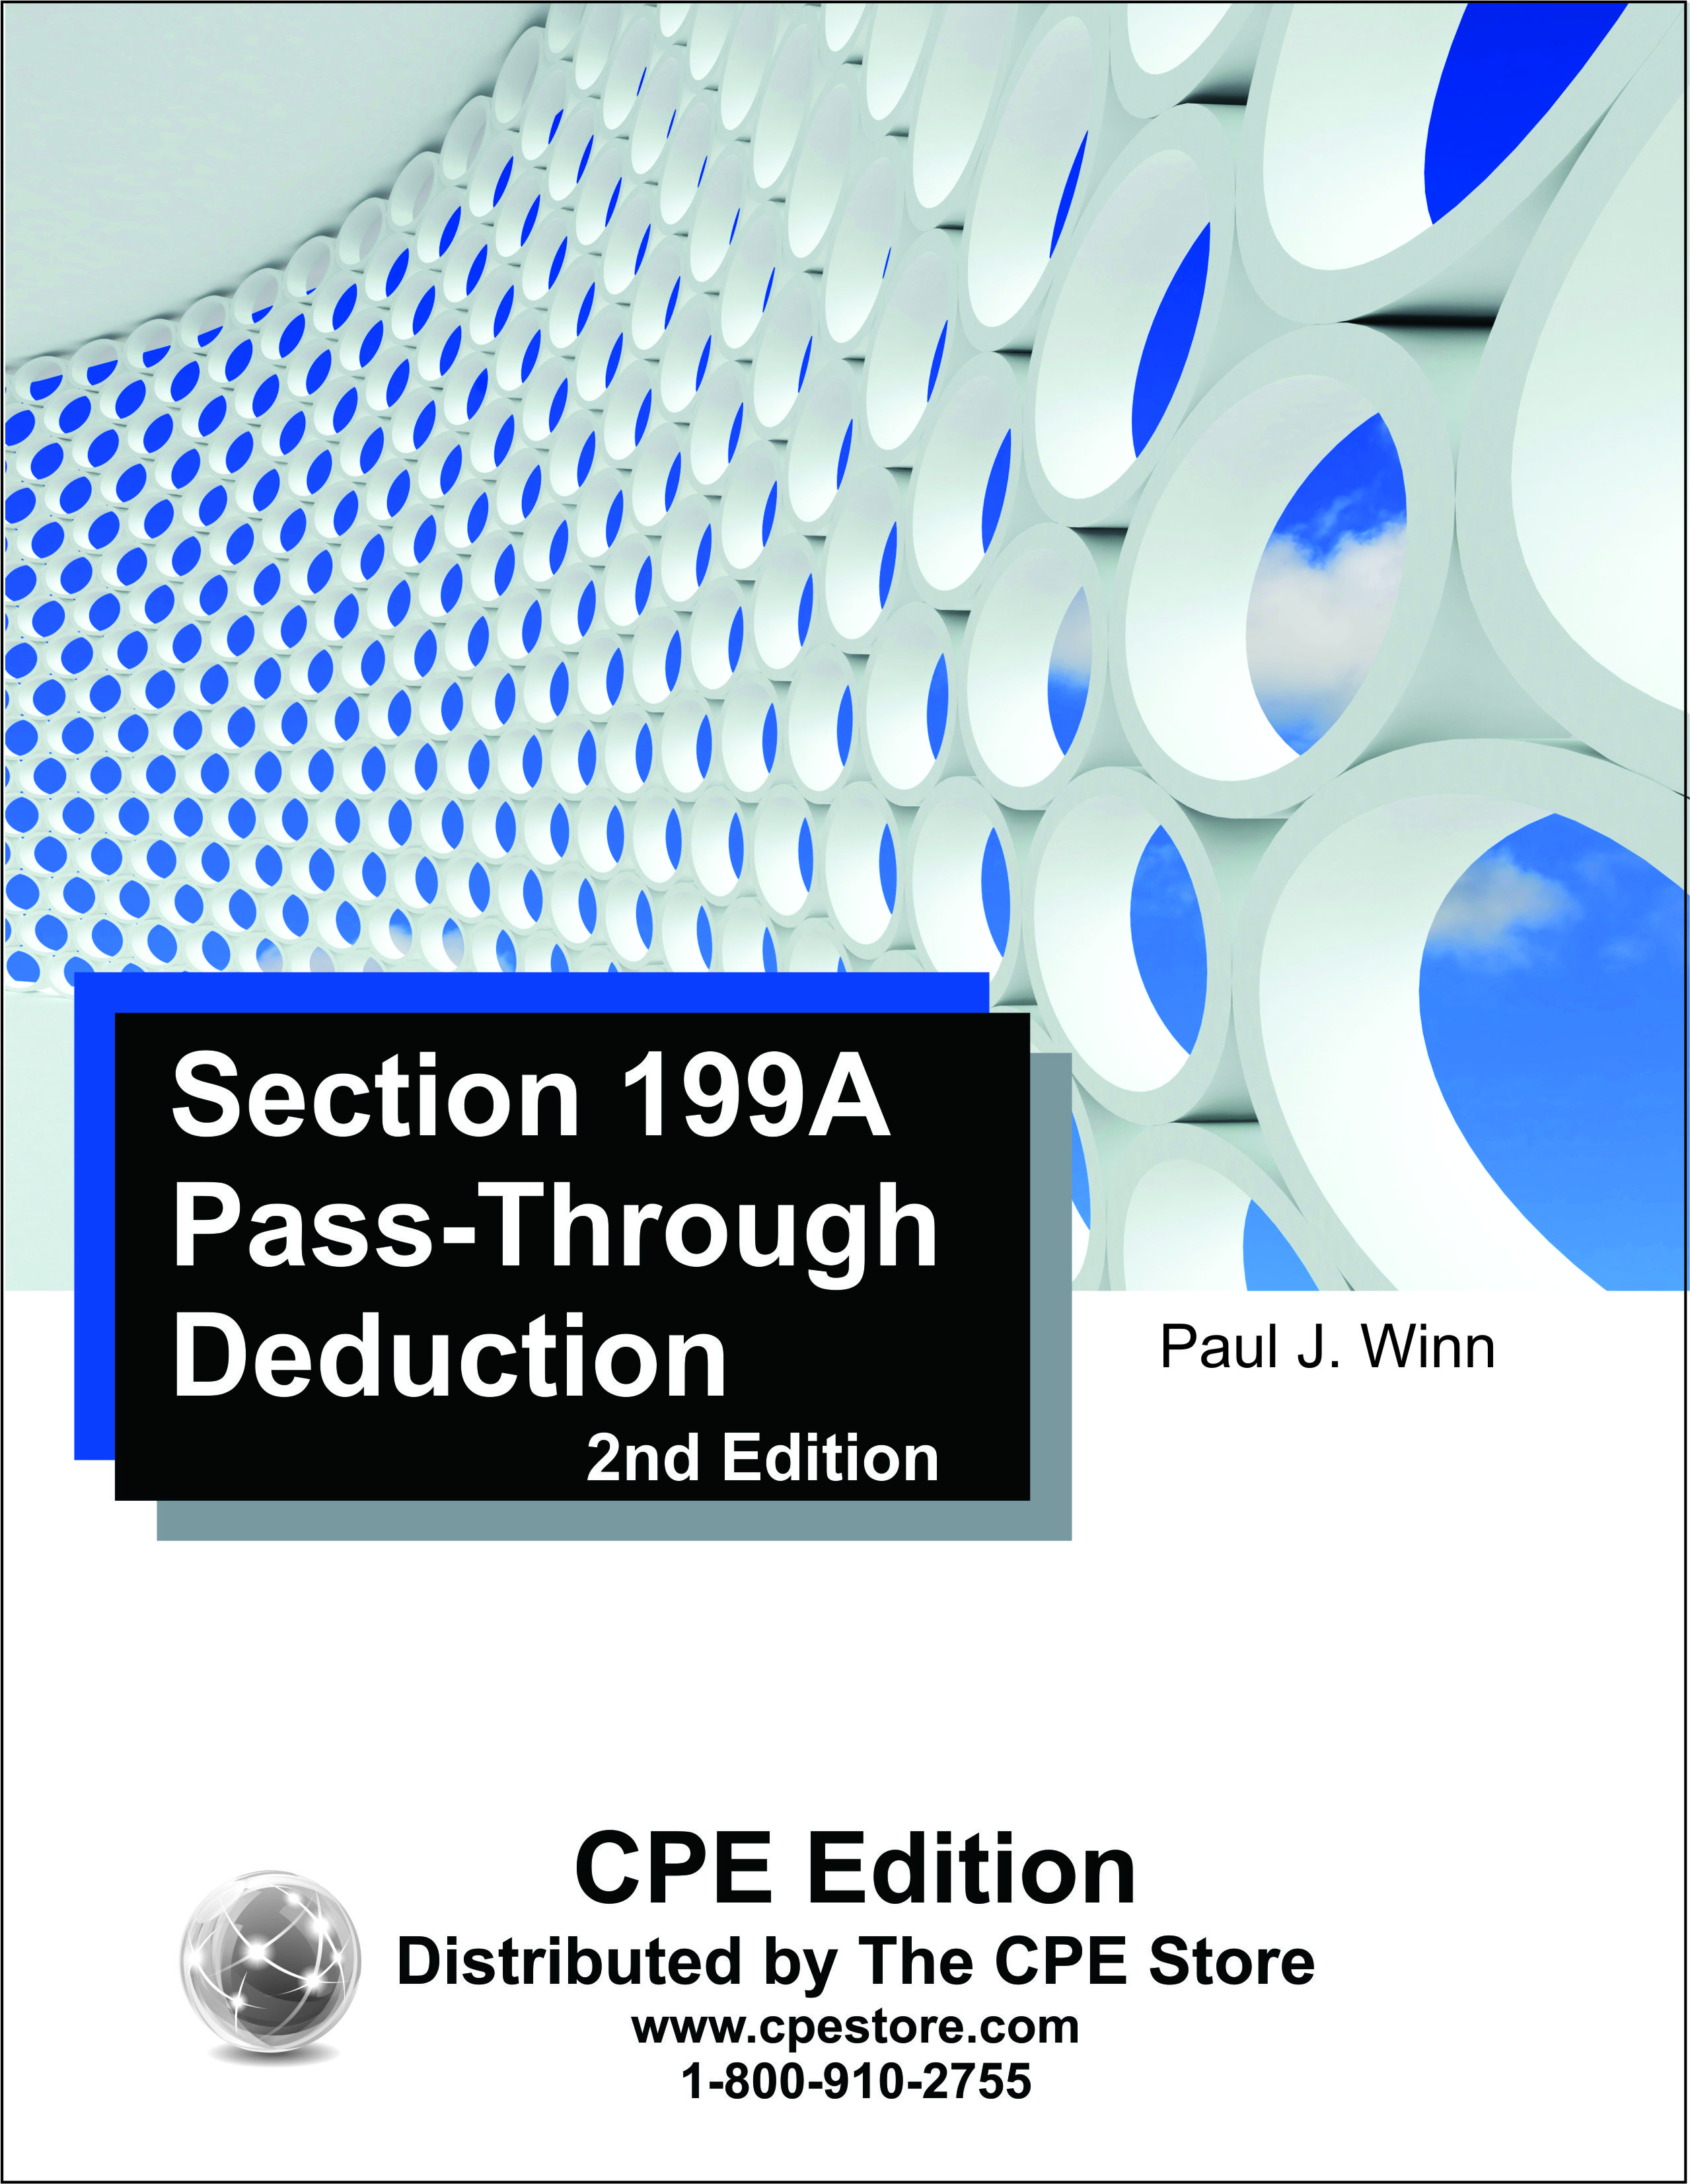 Section 199A Pass-Through Deduction